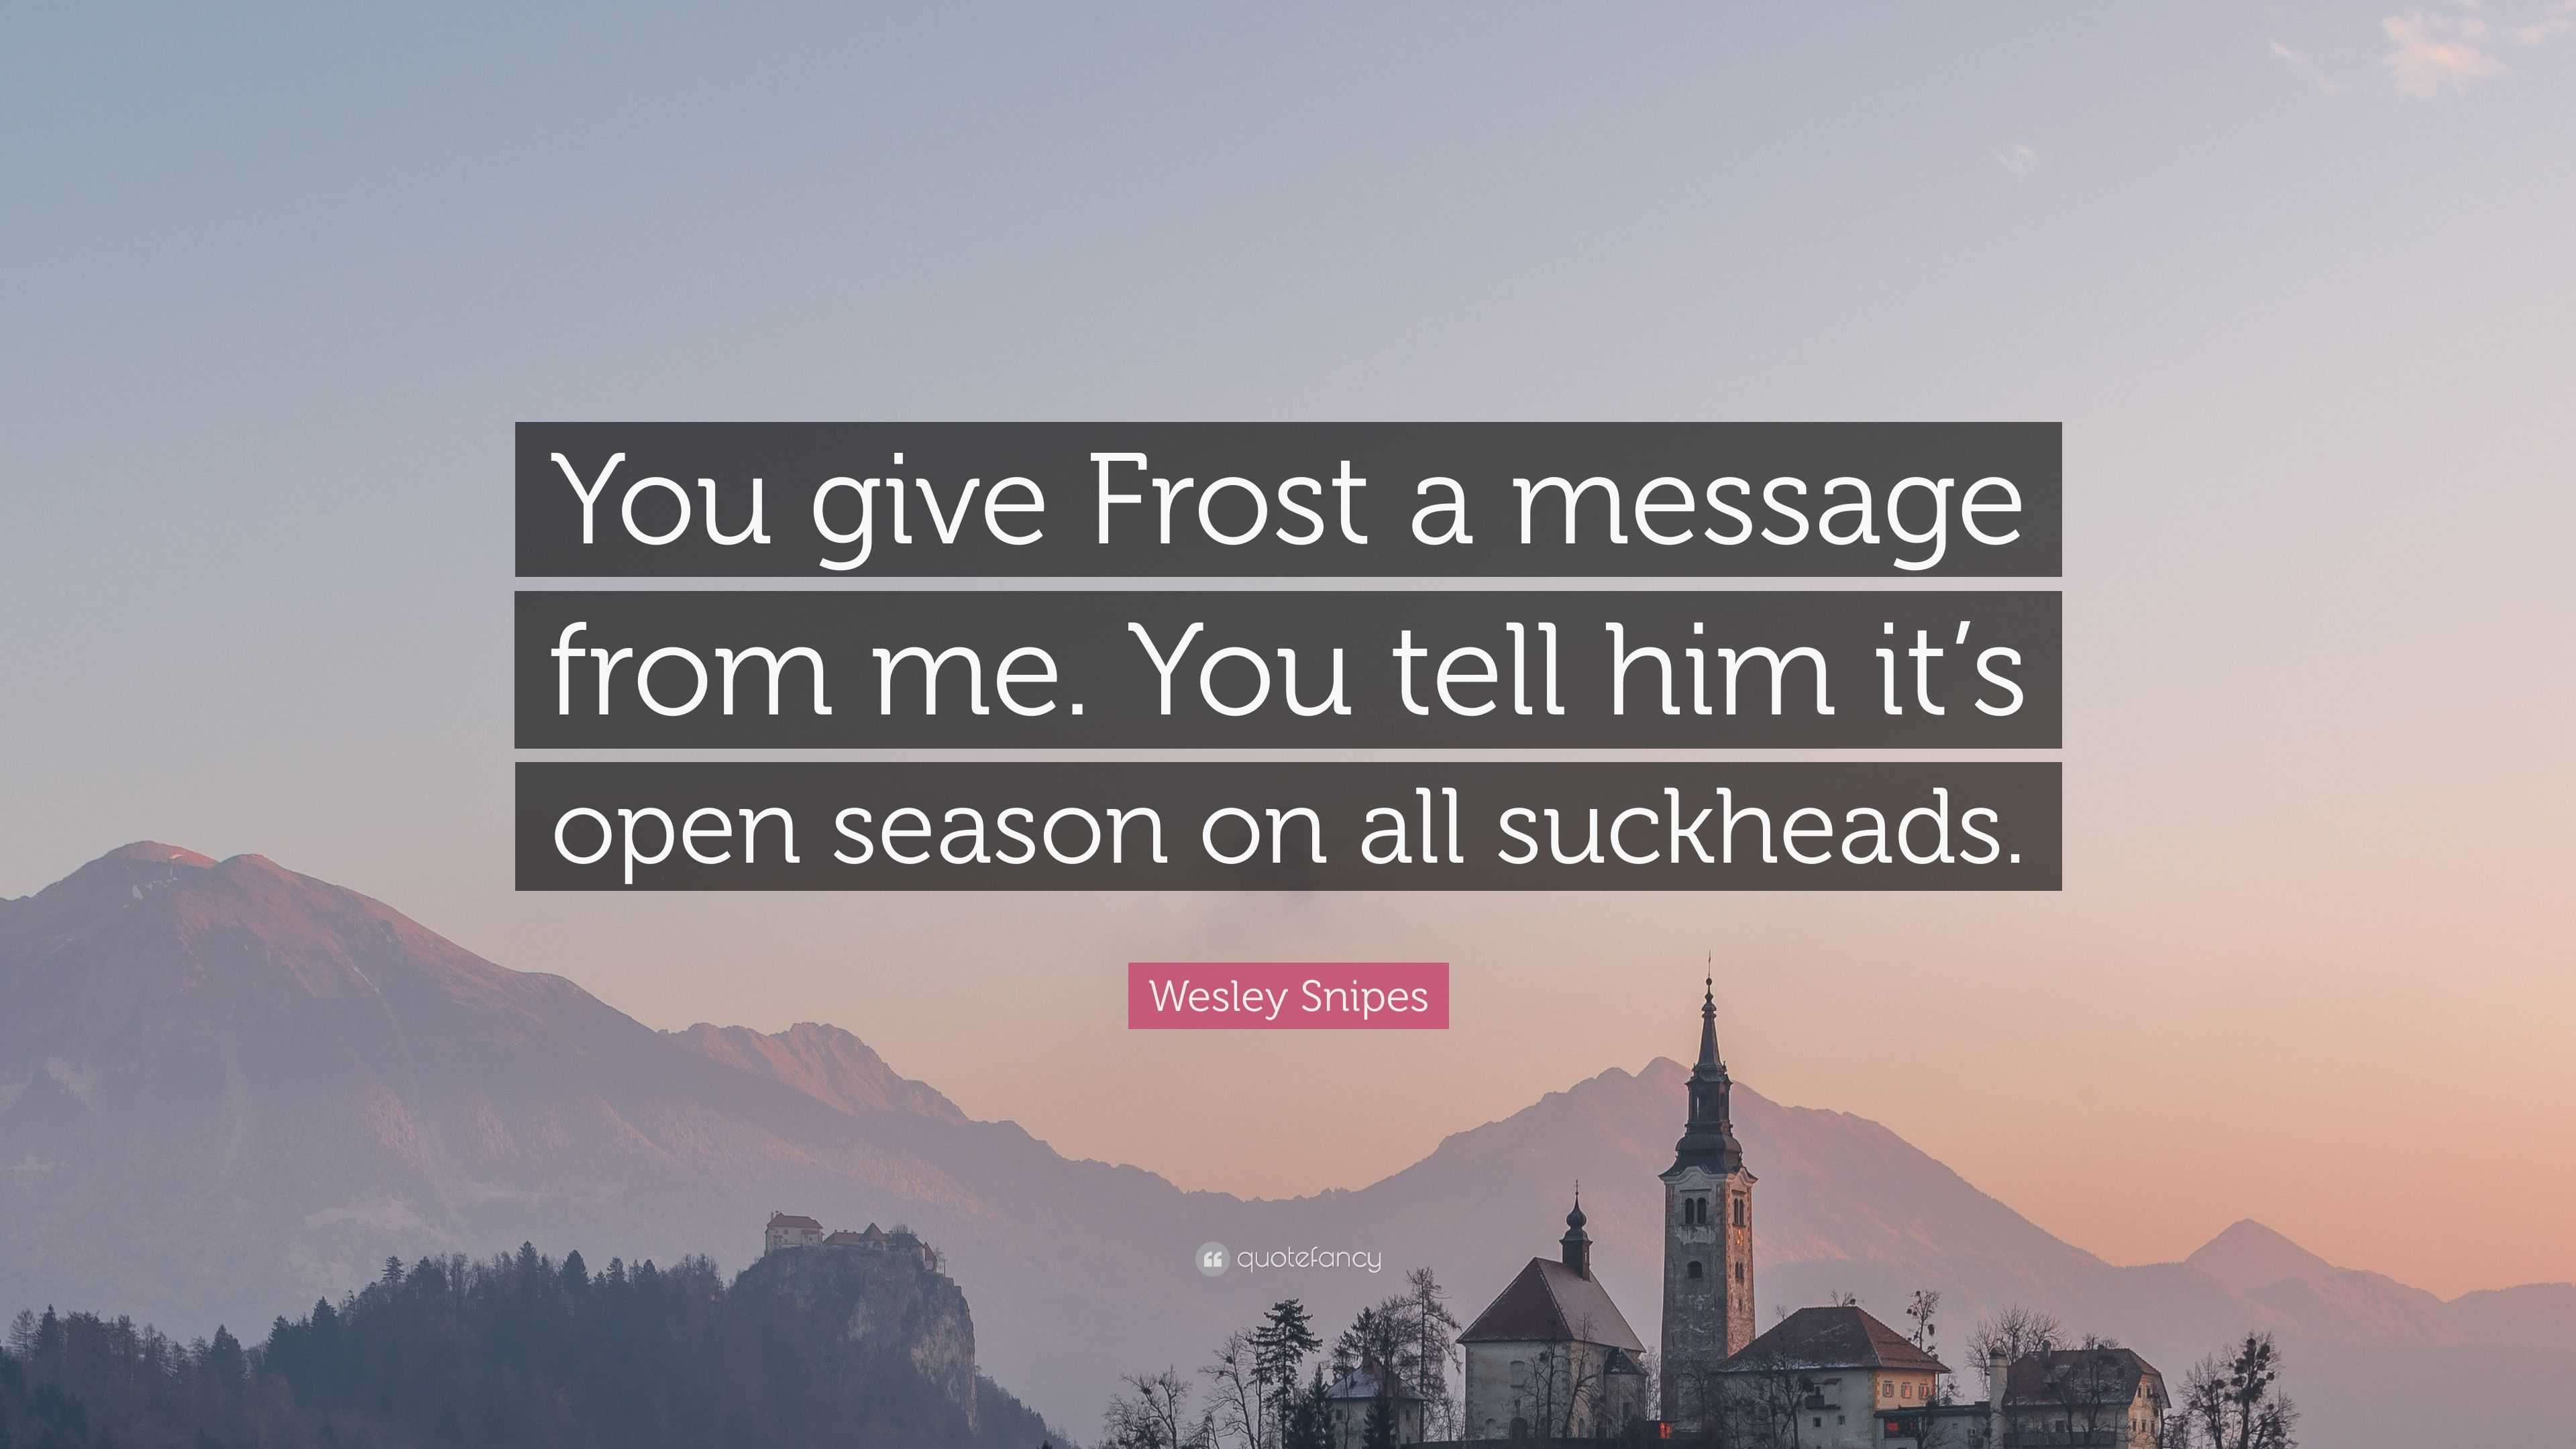 The person who sent you this wants you to know that they want a Frost